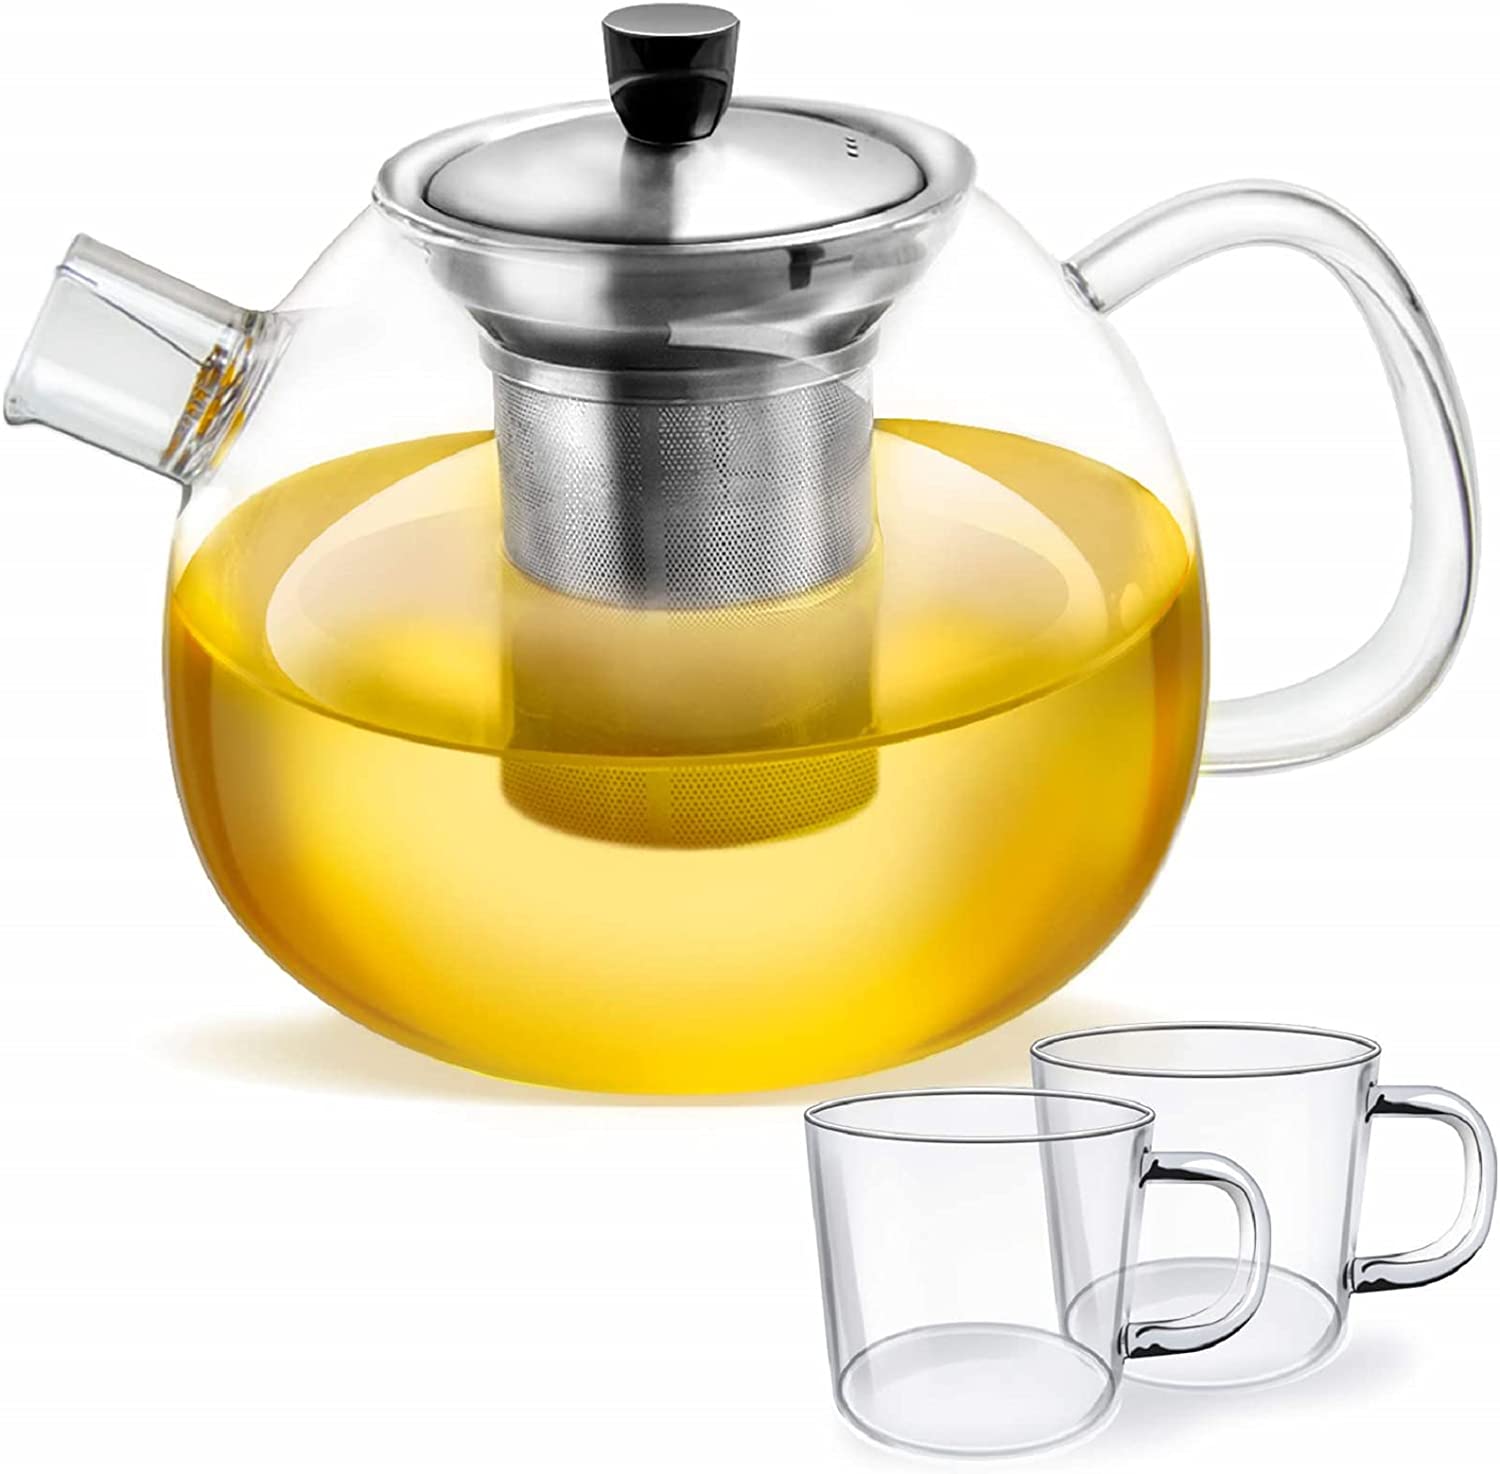 smartpeas glass teapot - 1500ml capacity - removable stainless steel filter & spout filter - heat resistant borosilicate glass - plus: Free warmer for keeping warm